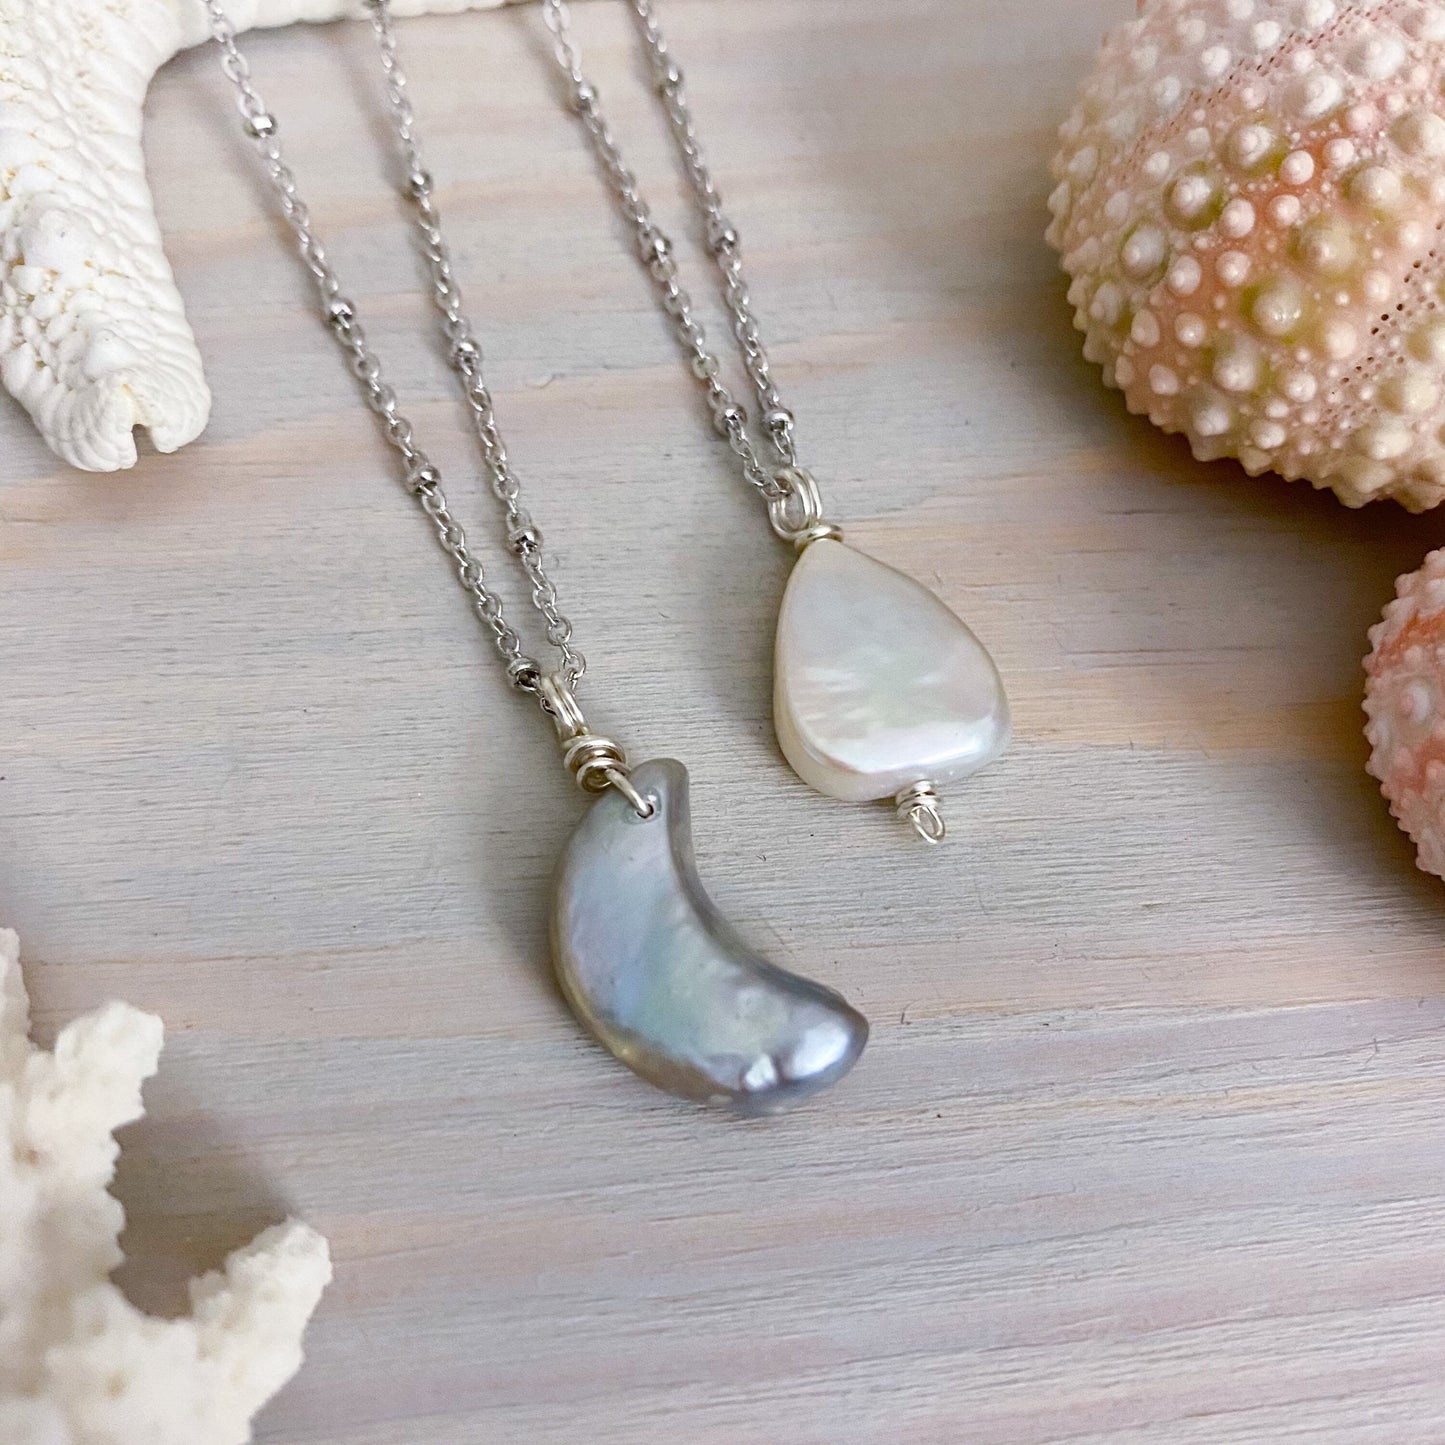 Freshwater Pearl Teardrop or Moon Necklace - Simple Pearl Pendant Necklace